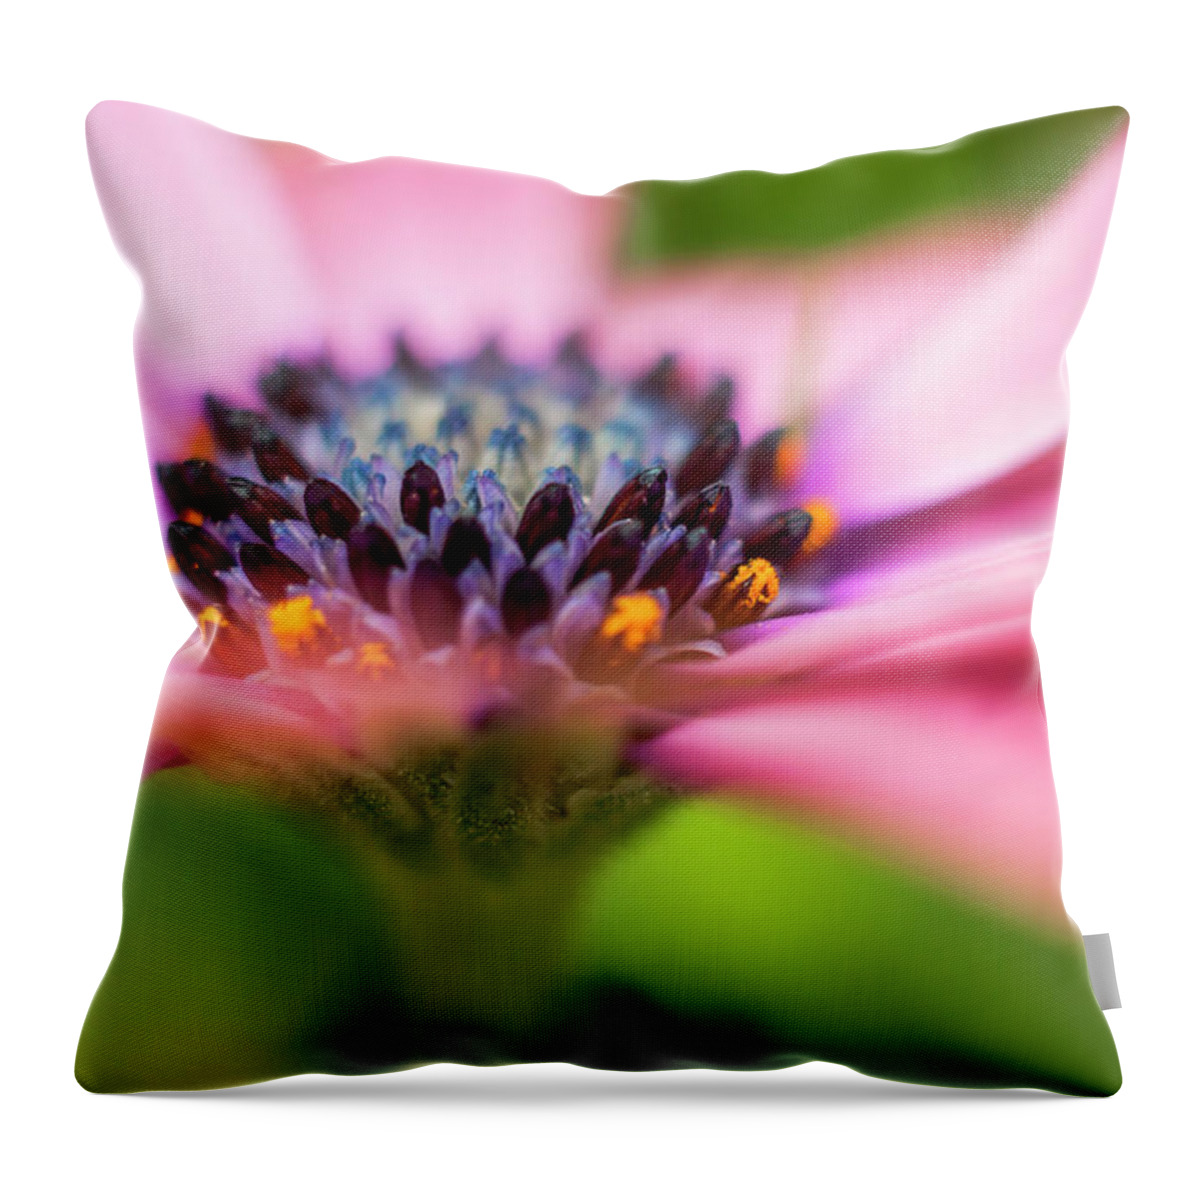 Flowers Throw Pillow featuring the photograph Whirling Dervish. by Usha Peddamatham